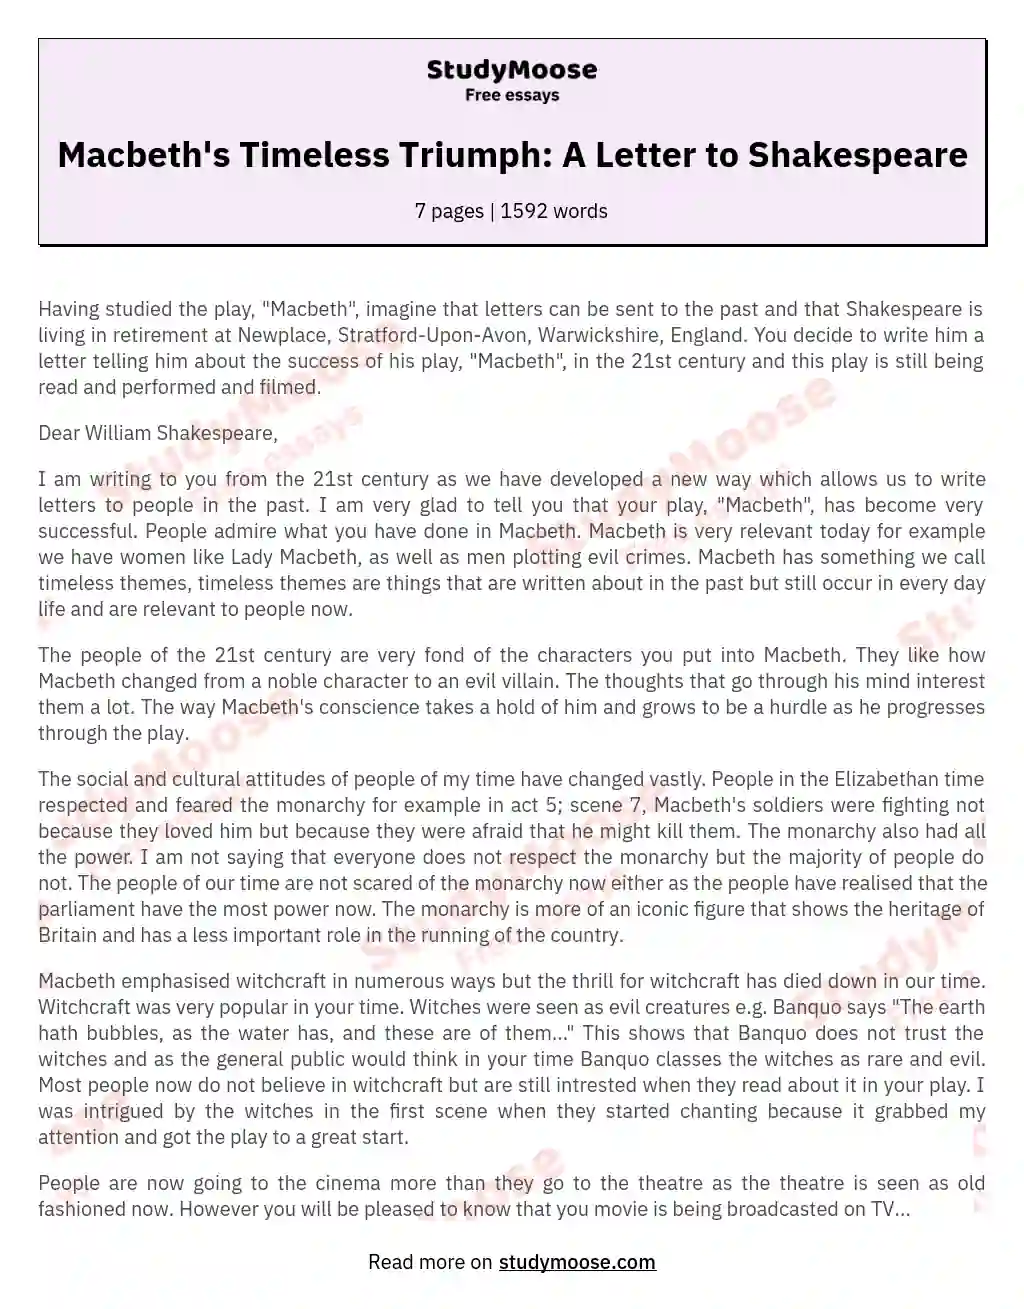 Macbeth's Timeless Triumph: A Letter to Shakespeare essay